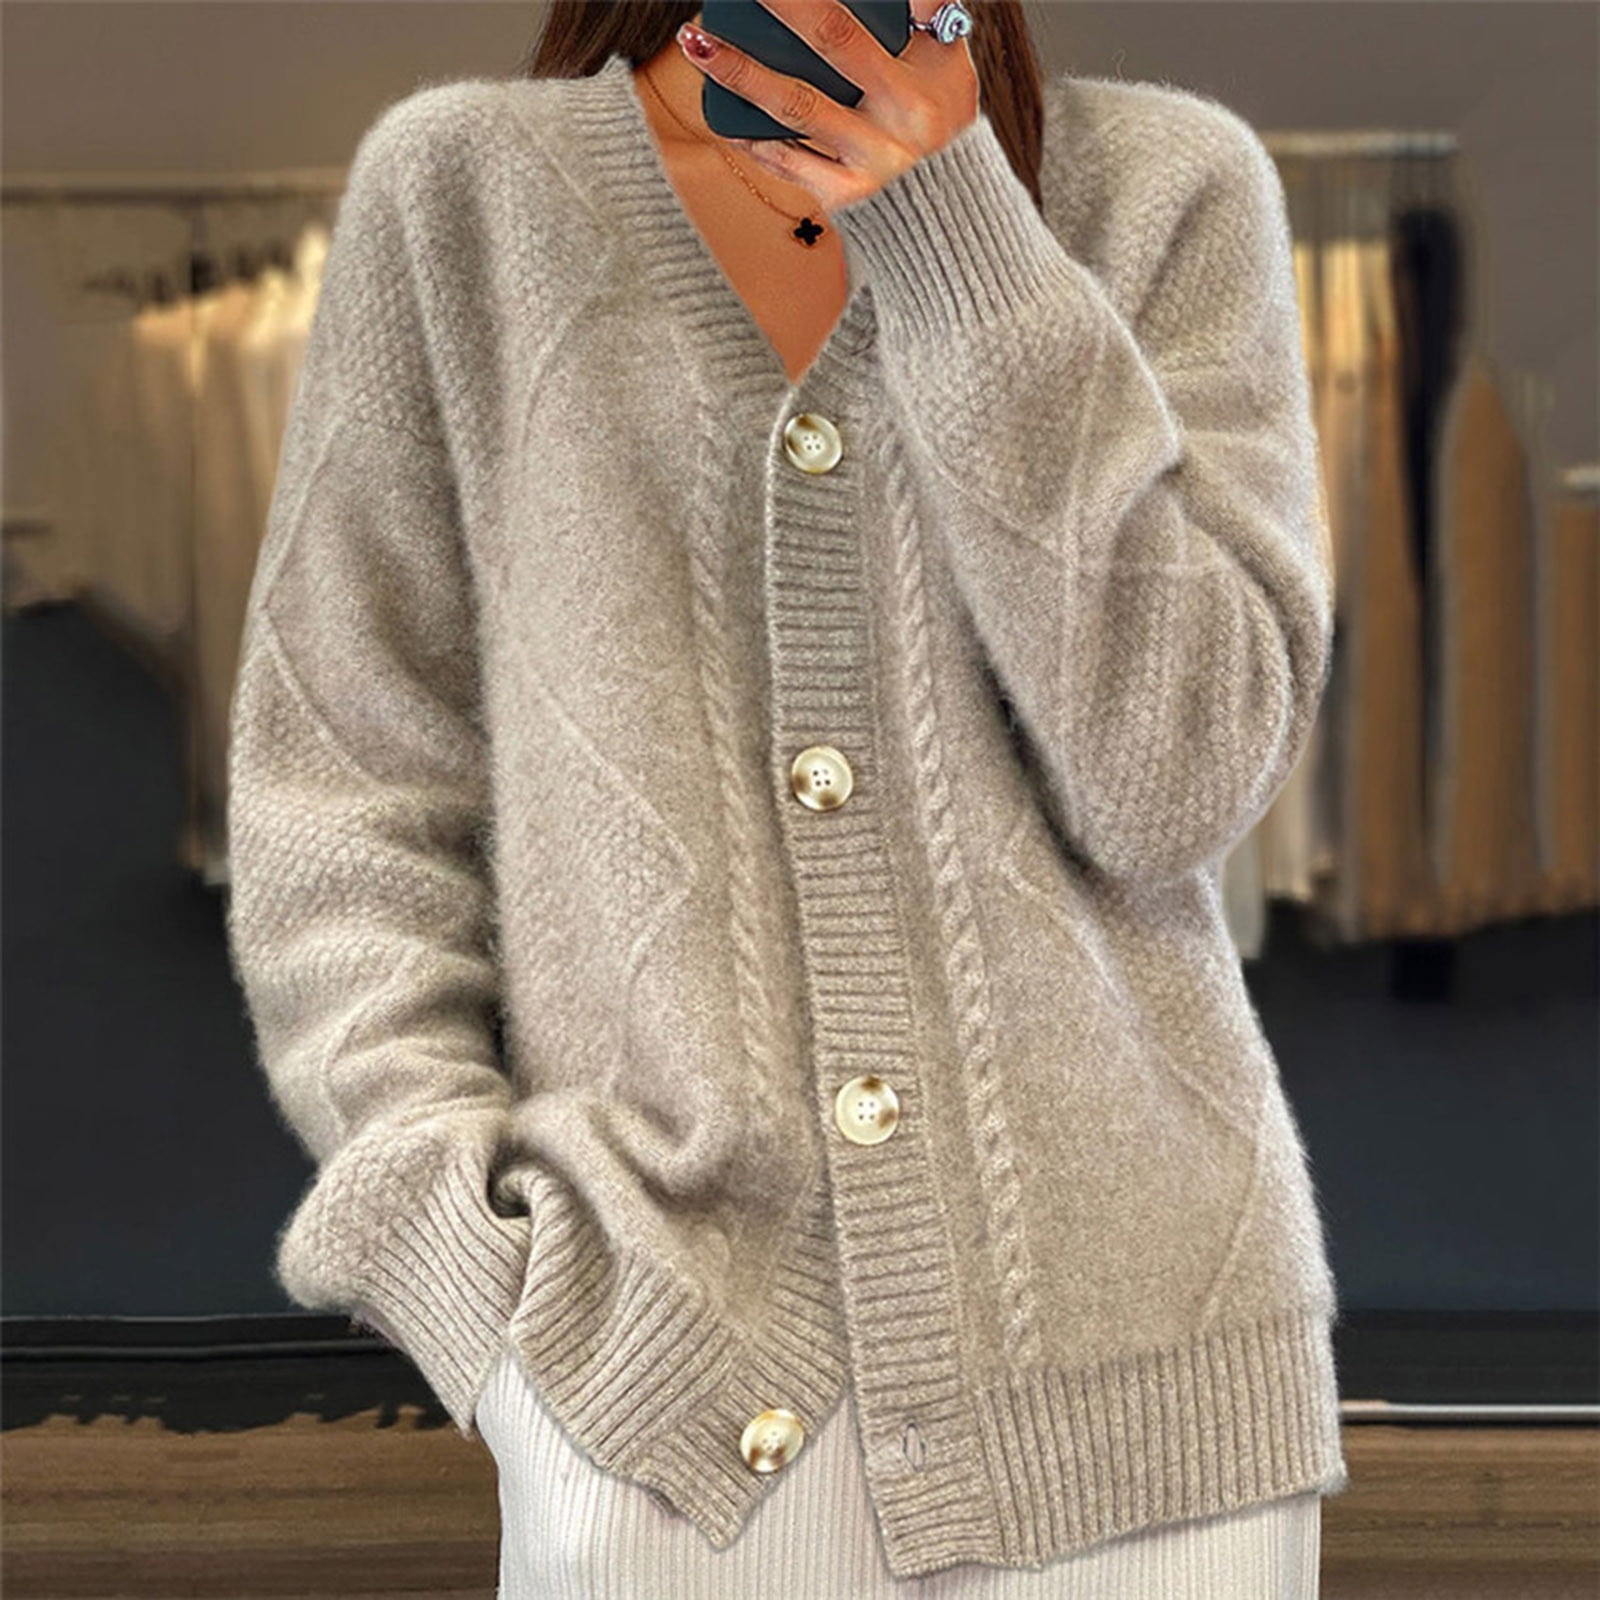 Aboser Cashmere Sweaters Cardigan for Women Trendy Fuzzy Knit Sweater ...